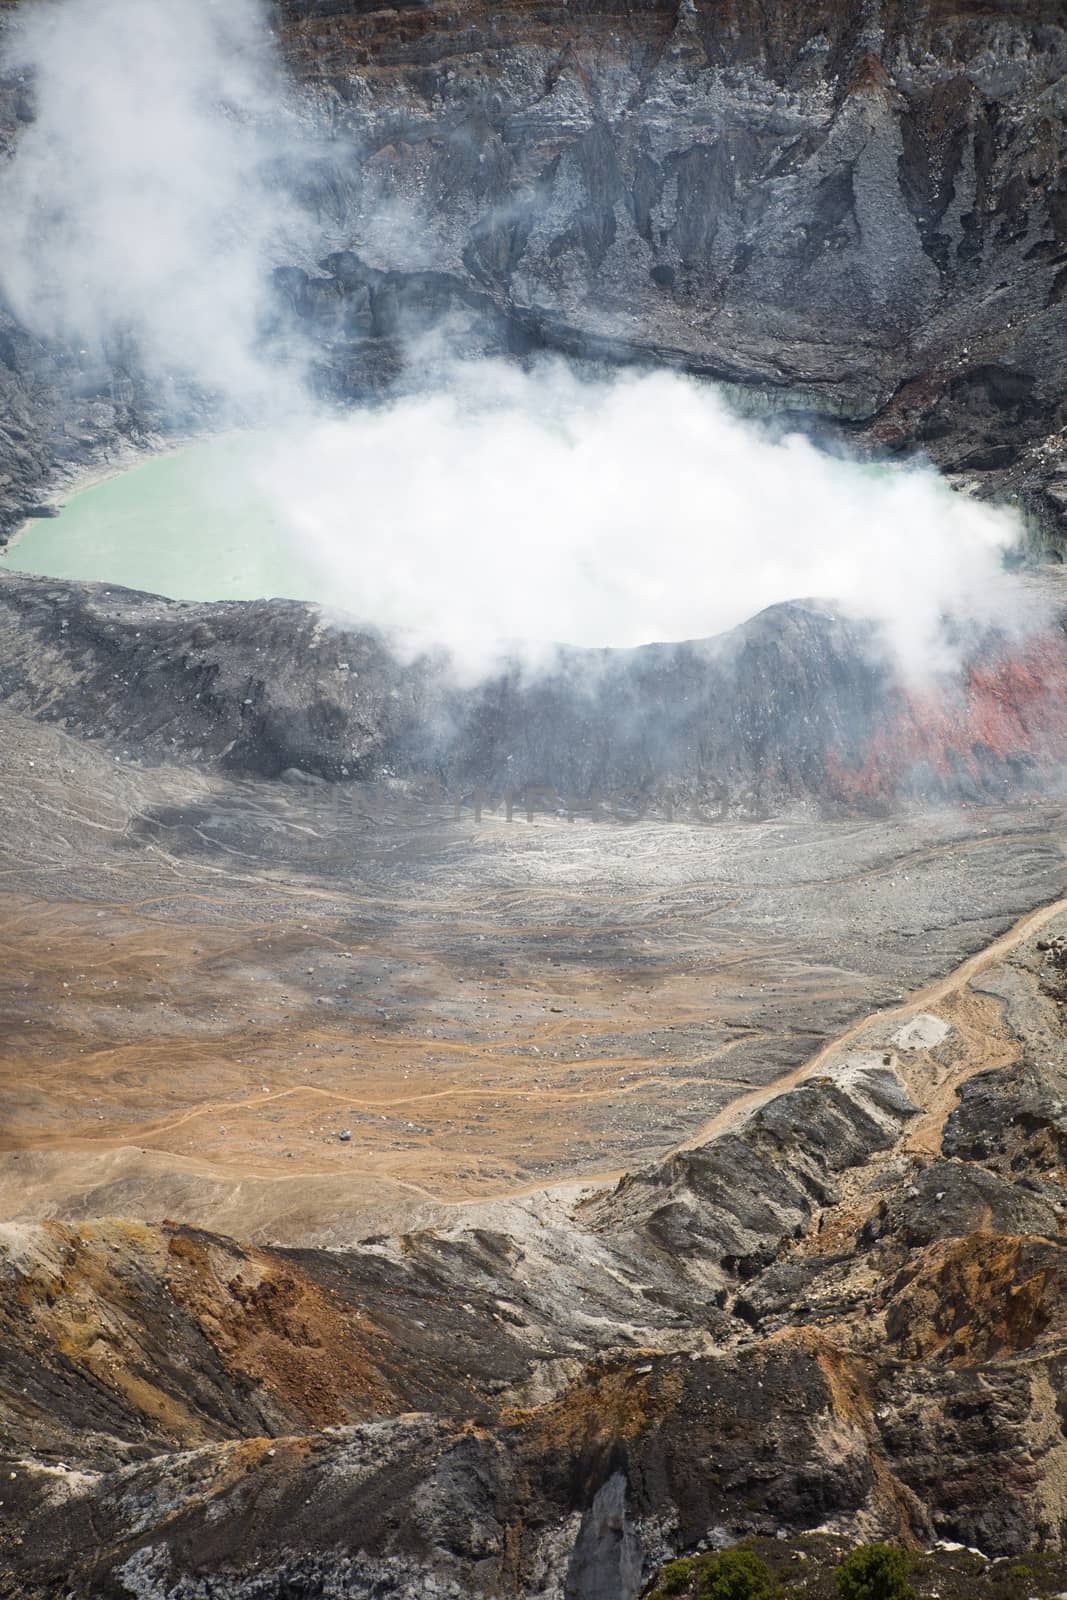 Fumarole smoke over the Poas Volcano in Costa Rica in 2012. Detail of the acid water crater with turquoise colors.